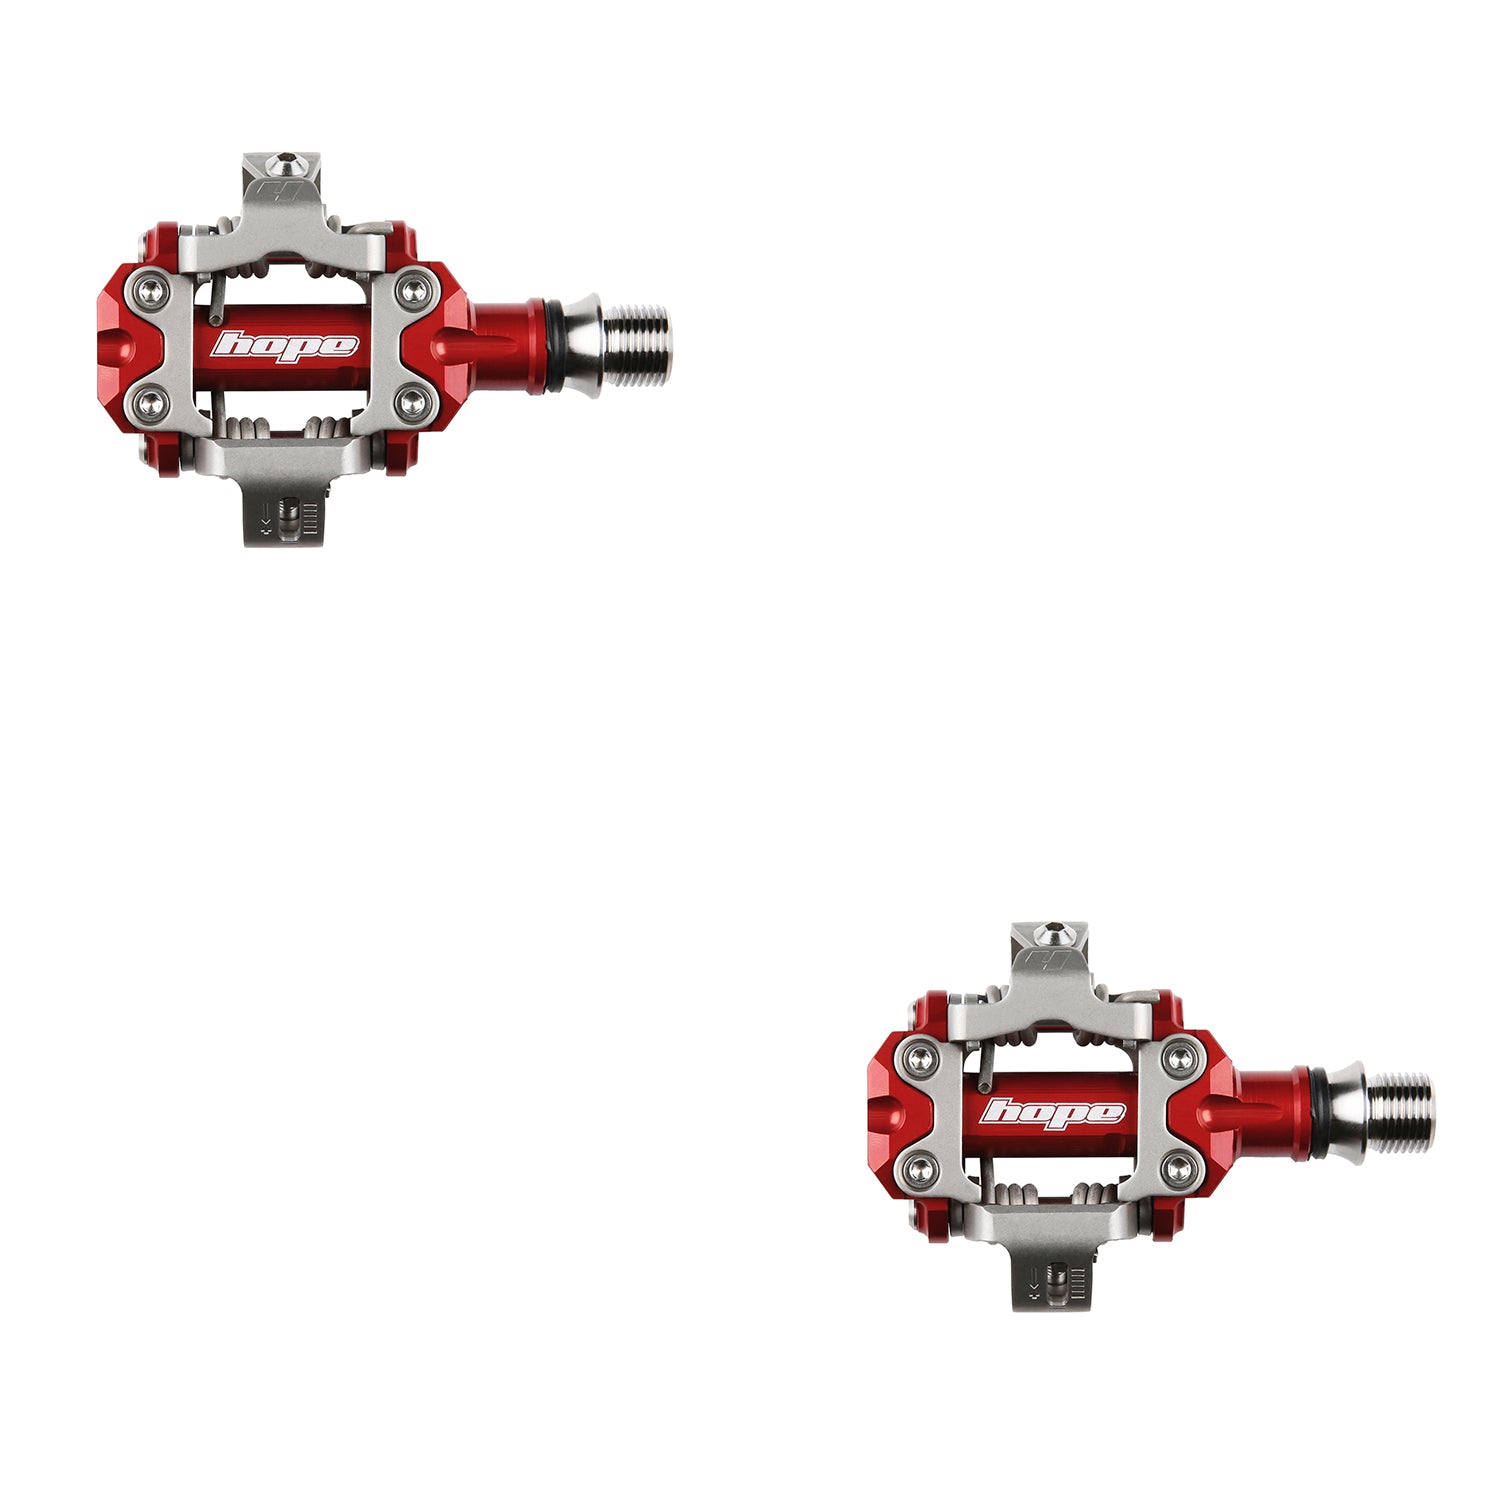 Hope union race clipless pedals red